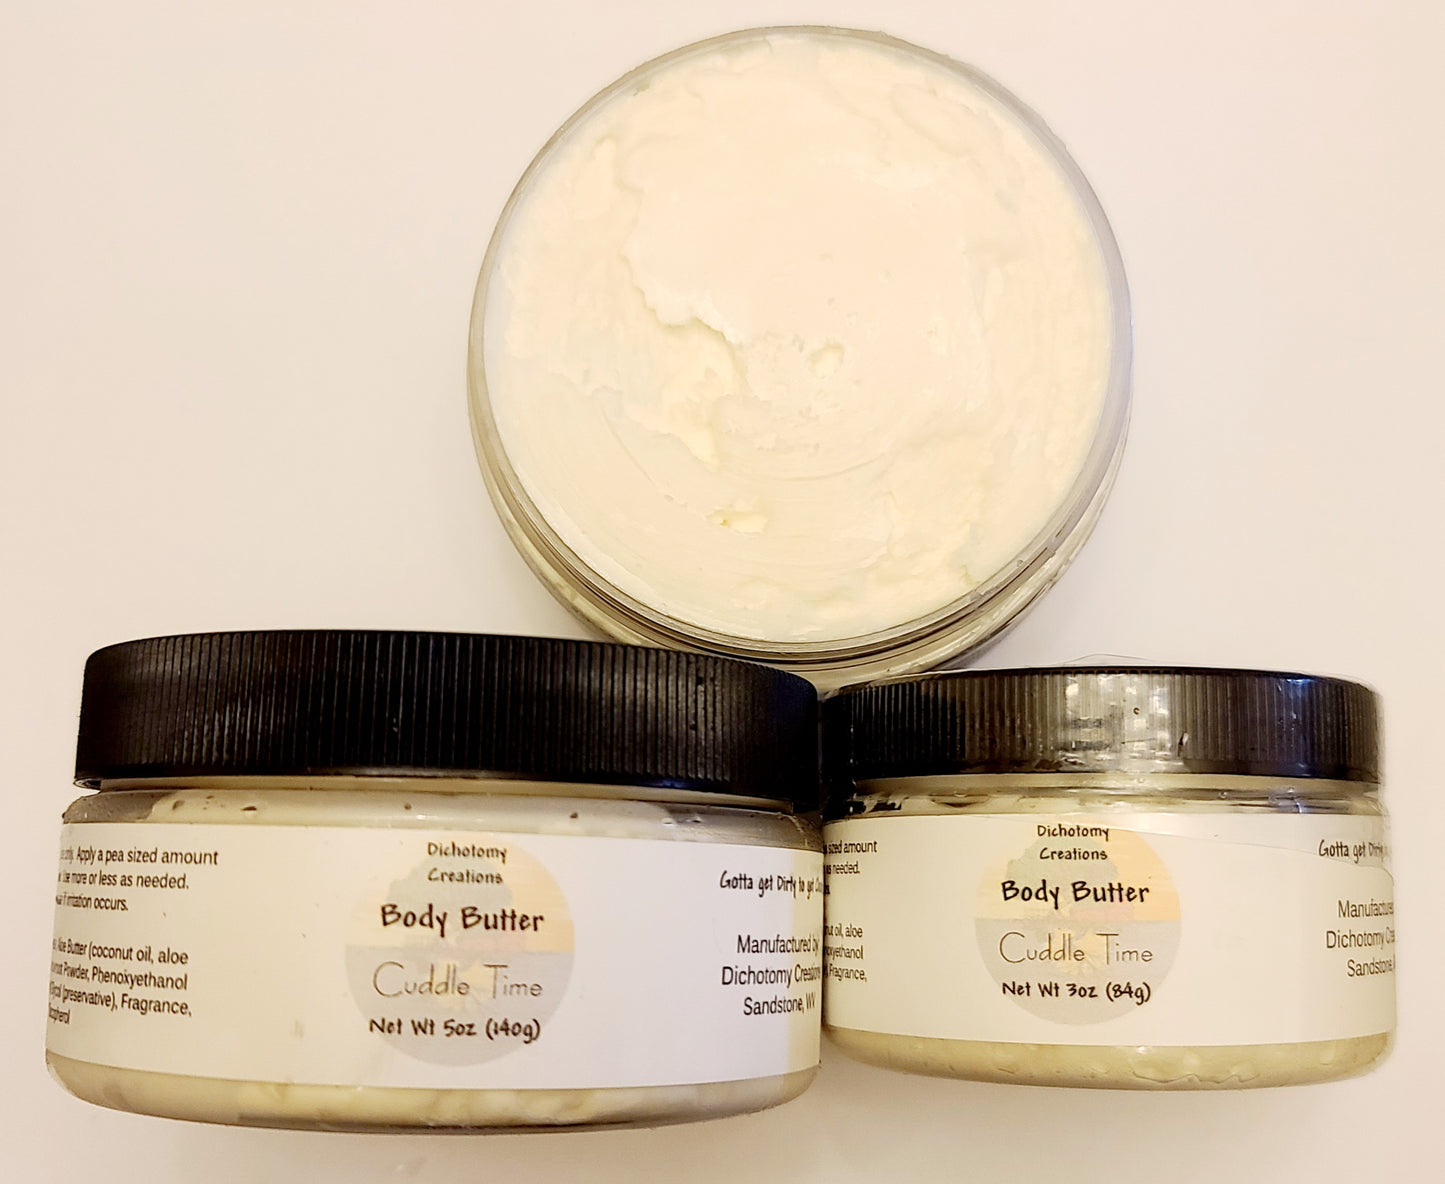 Cuddle Time (Cocoa Butter Cashmere) Whipped Body Butter